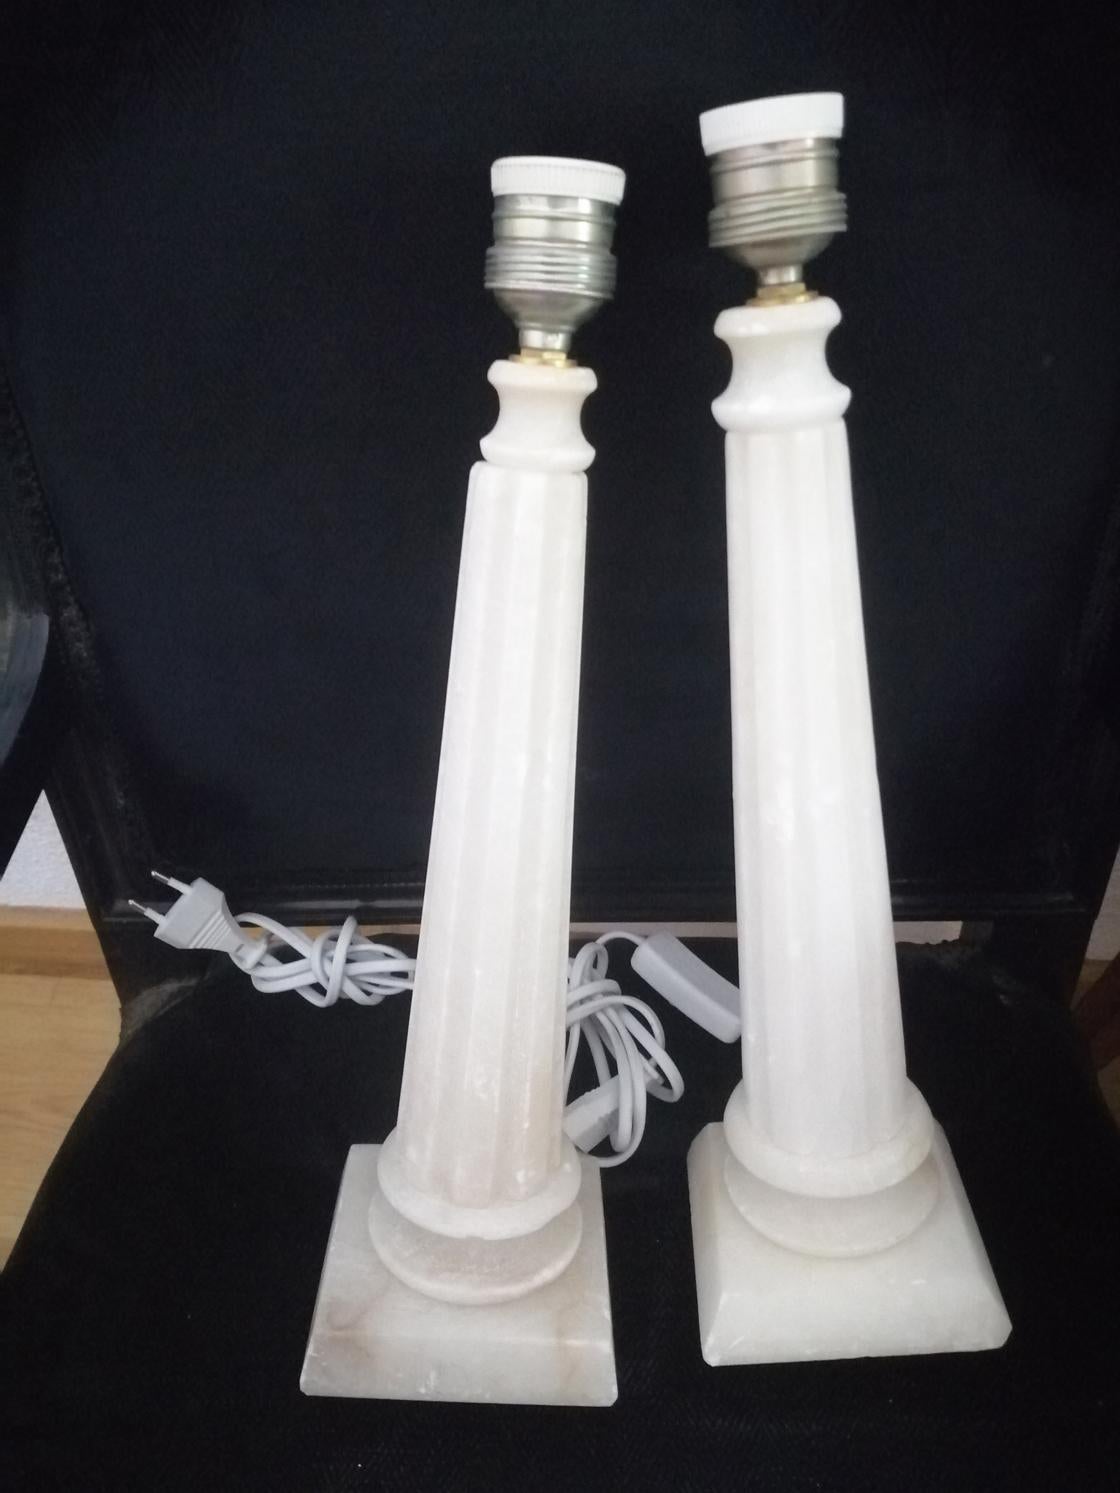 Only until the end of the year
Reasonable offers are welcome

Table lamp in white alabaster and brass 

It is suitable to put on a side table in the living room or on a bedside table

It is in very good condition

If the shipment is to the USA, it